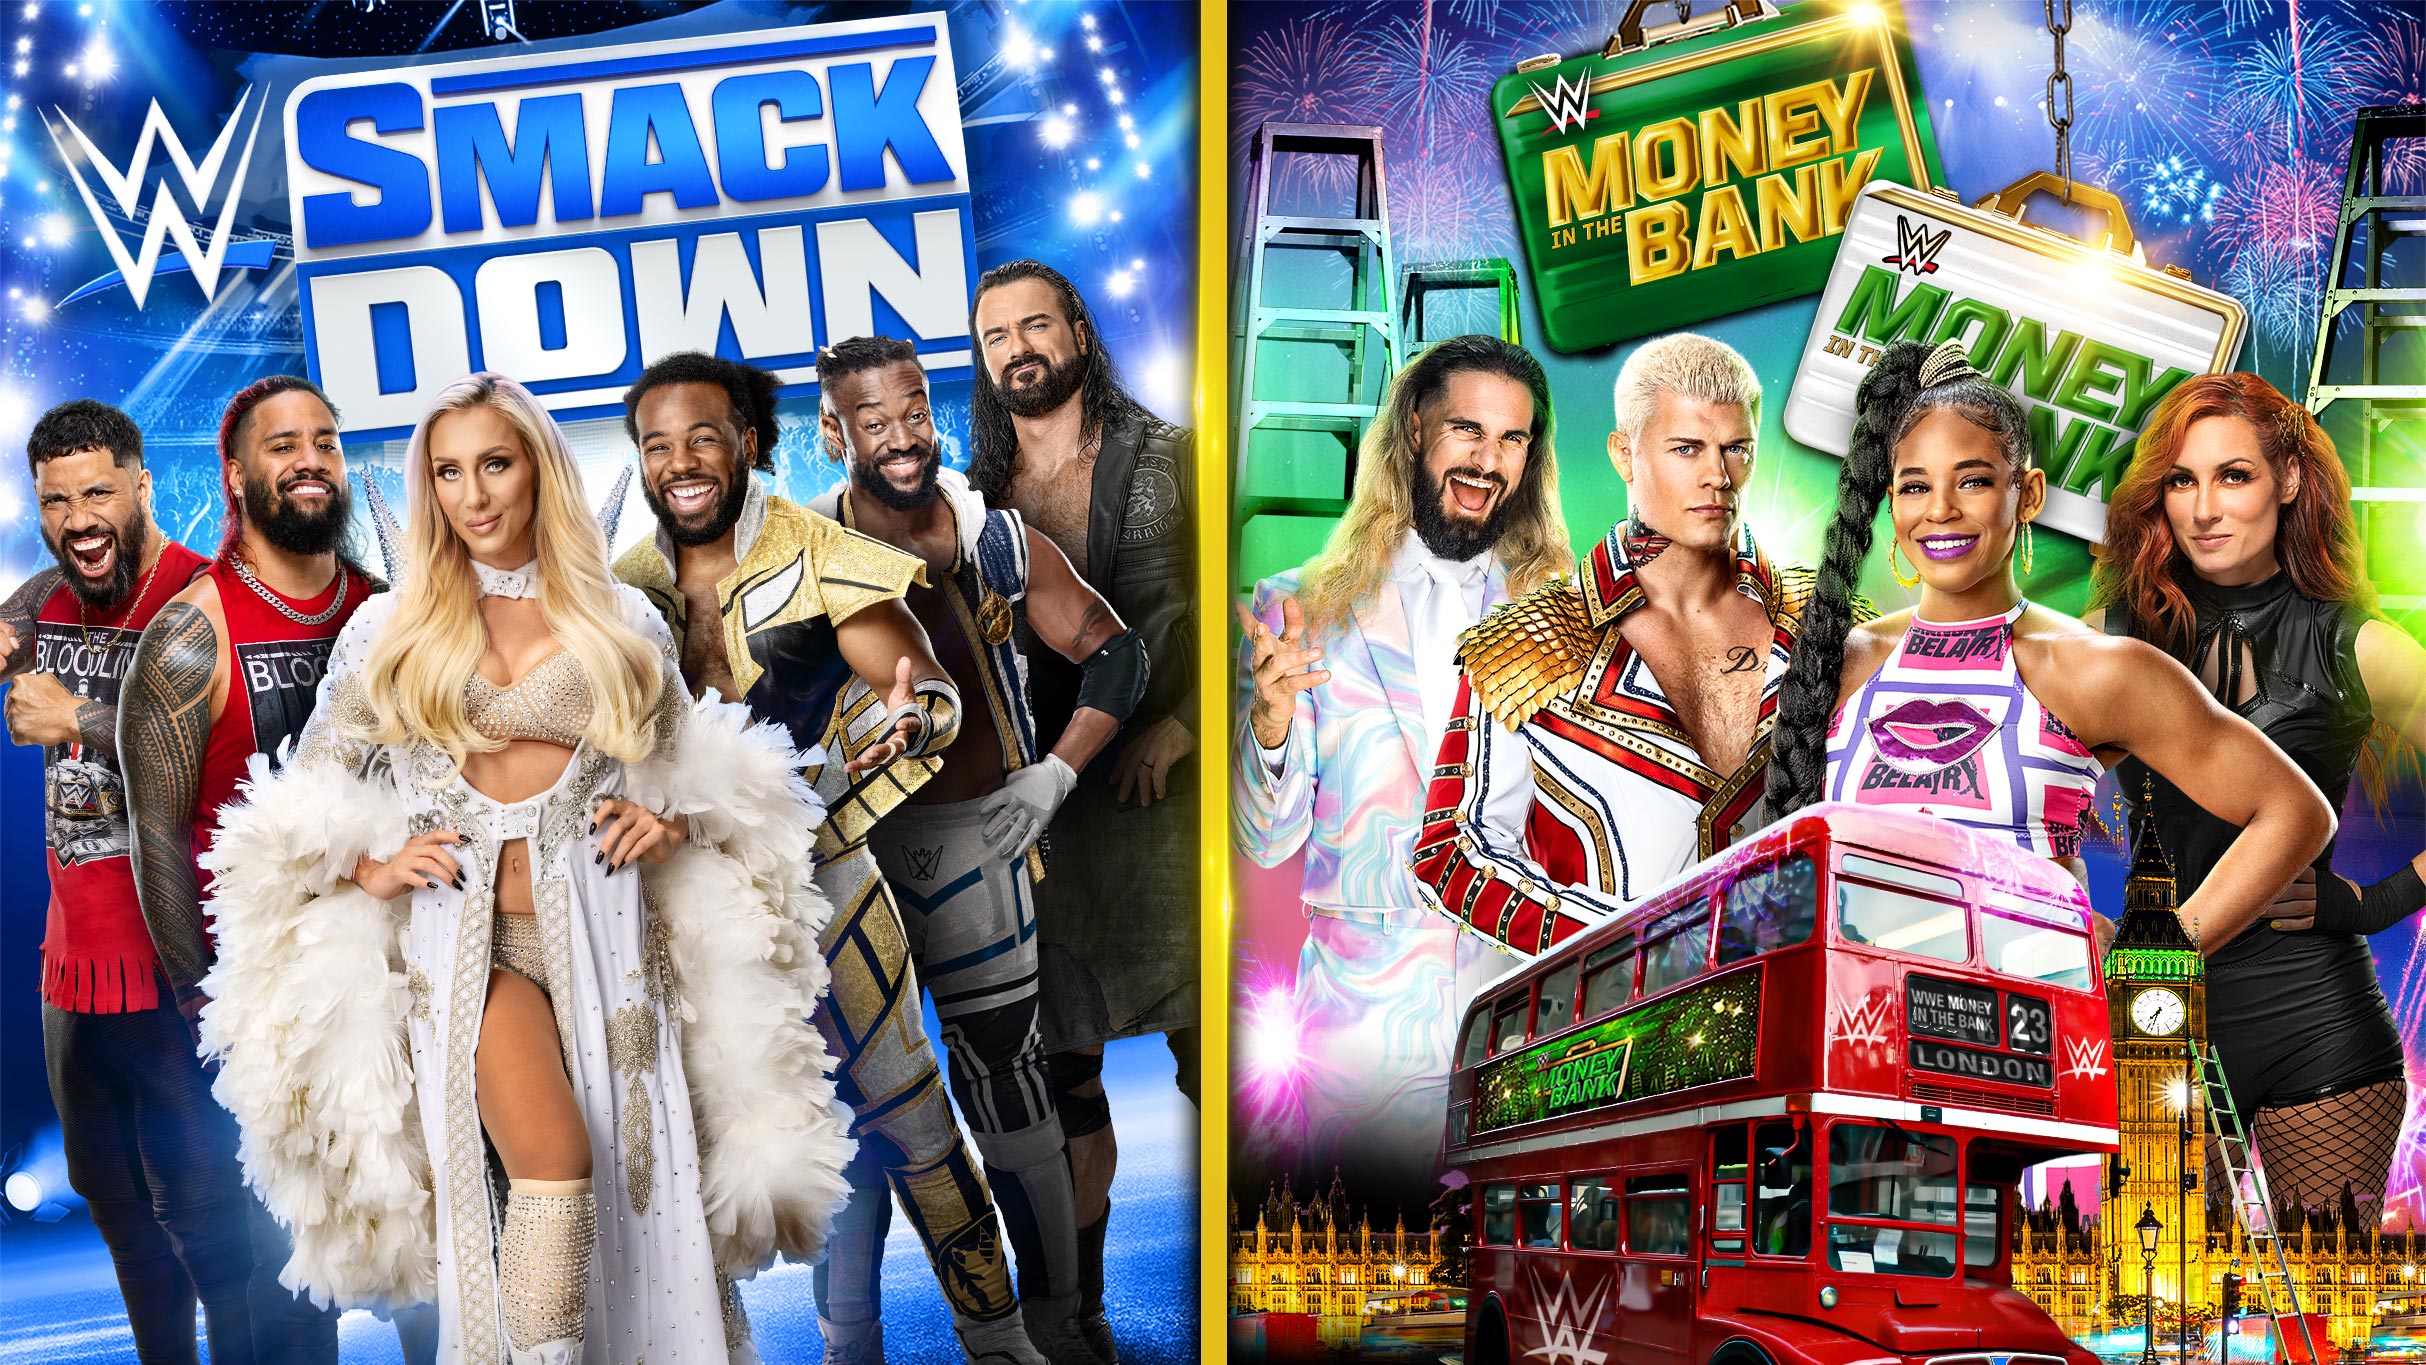 WWE Smackdown & Money in the Bank Combo Ticket in London promo photo for WWE Partners presale offer code